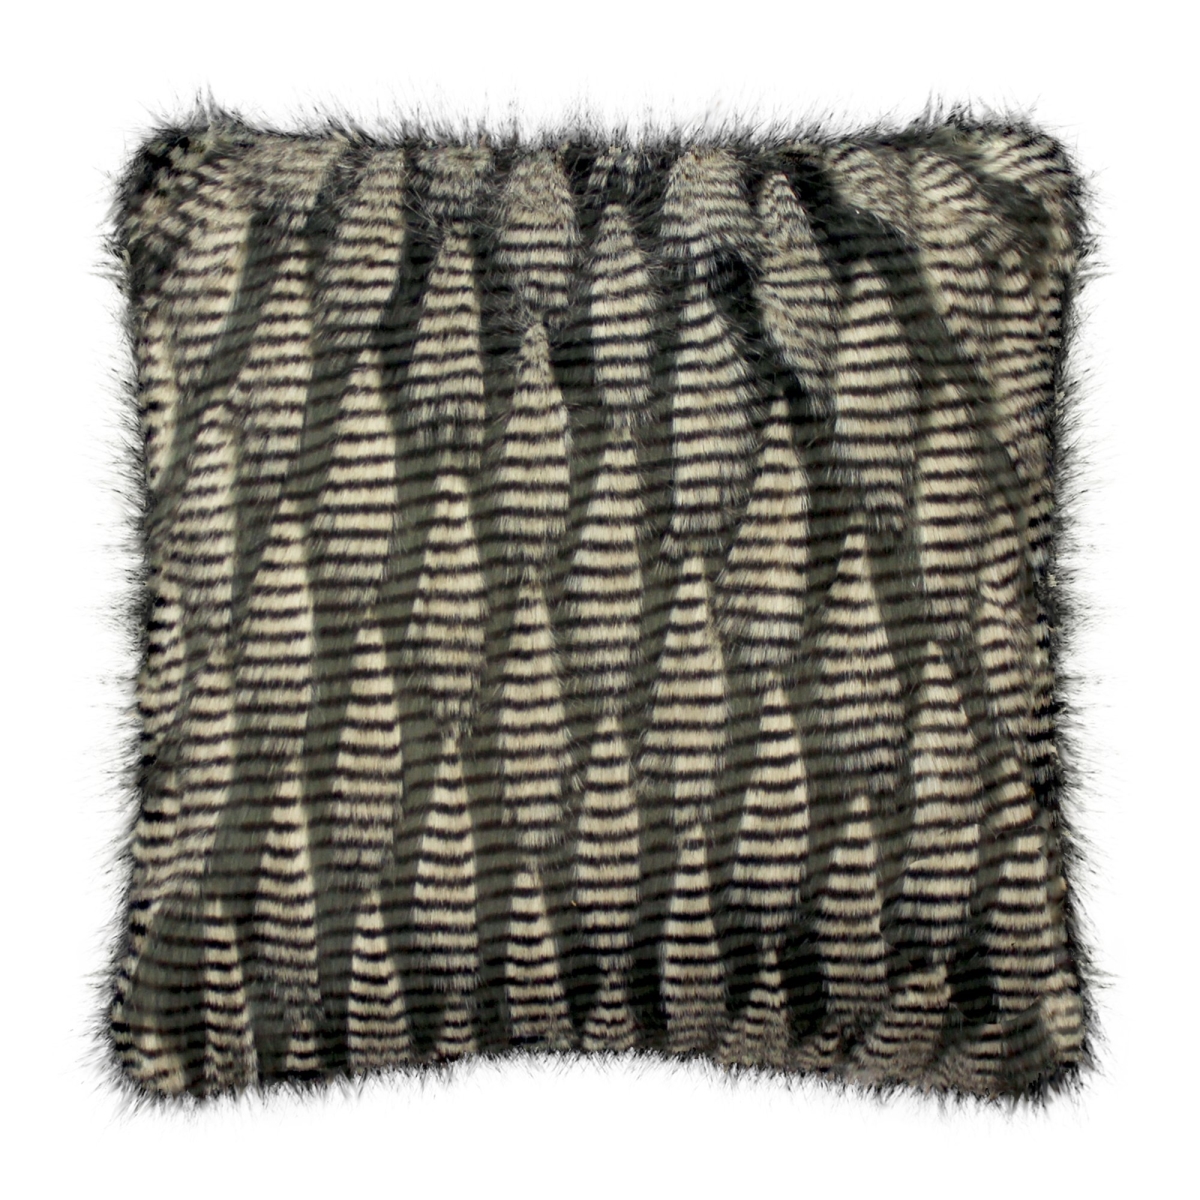 18 X 18 In. Jacquard Faux Fur Throw Pillow - 100 Percent Duck Feather